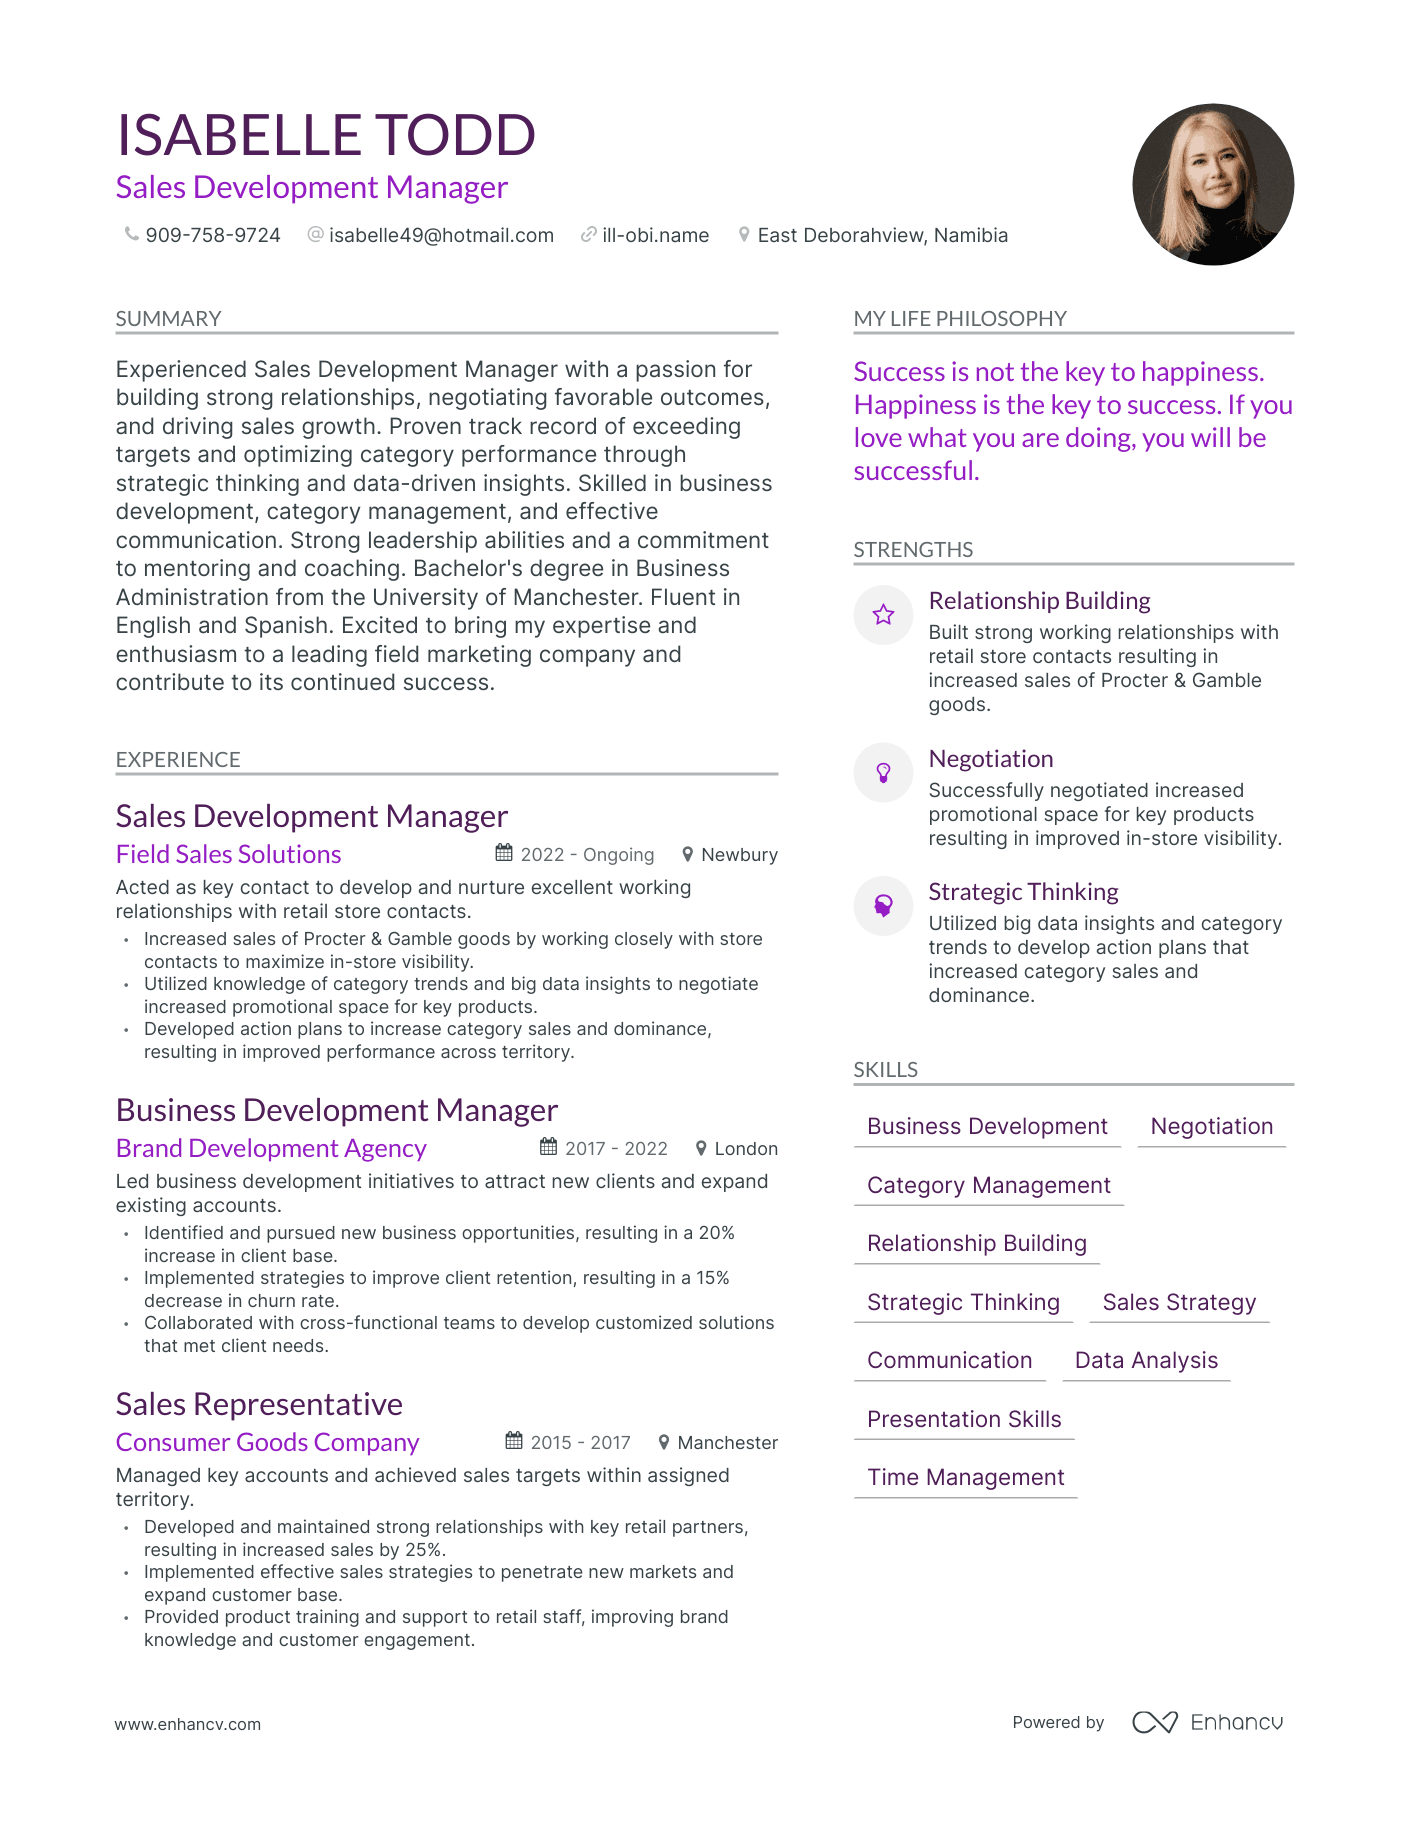 Sales Development Manager resume example